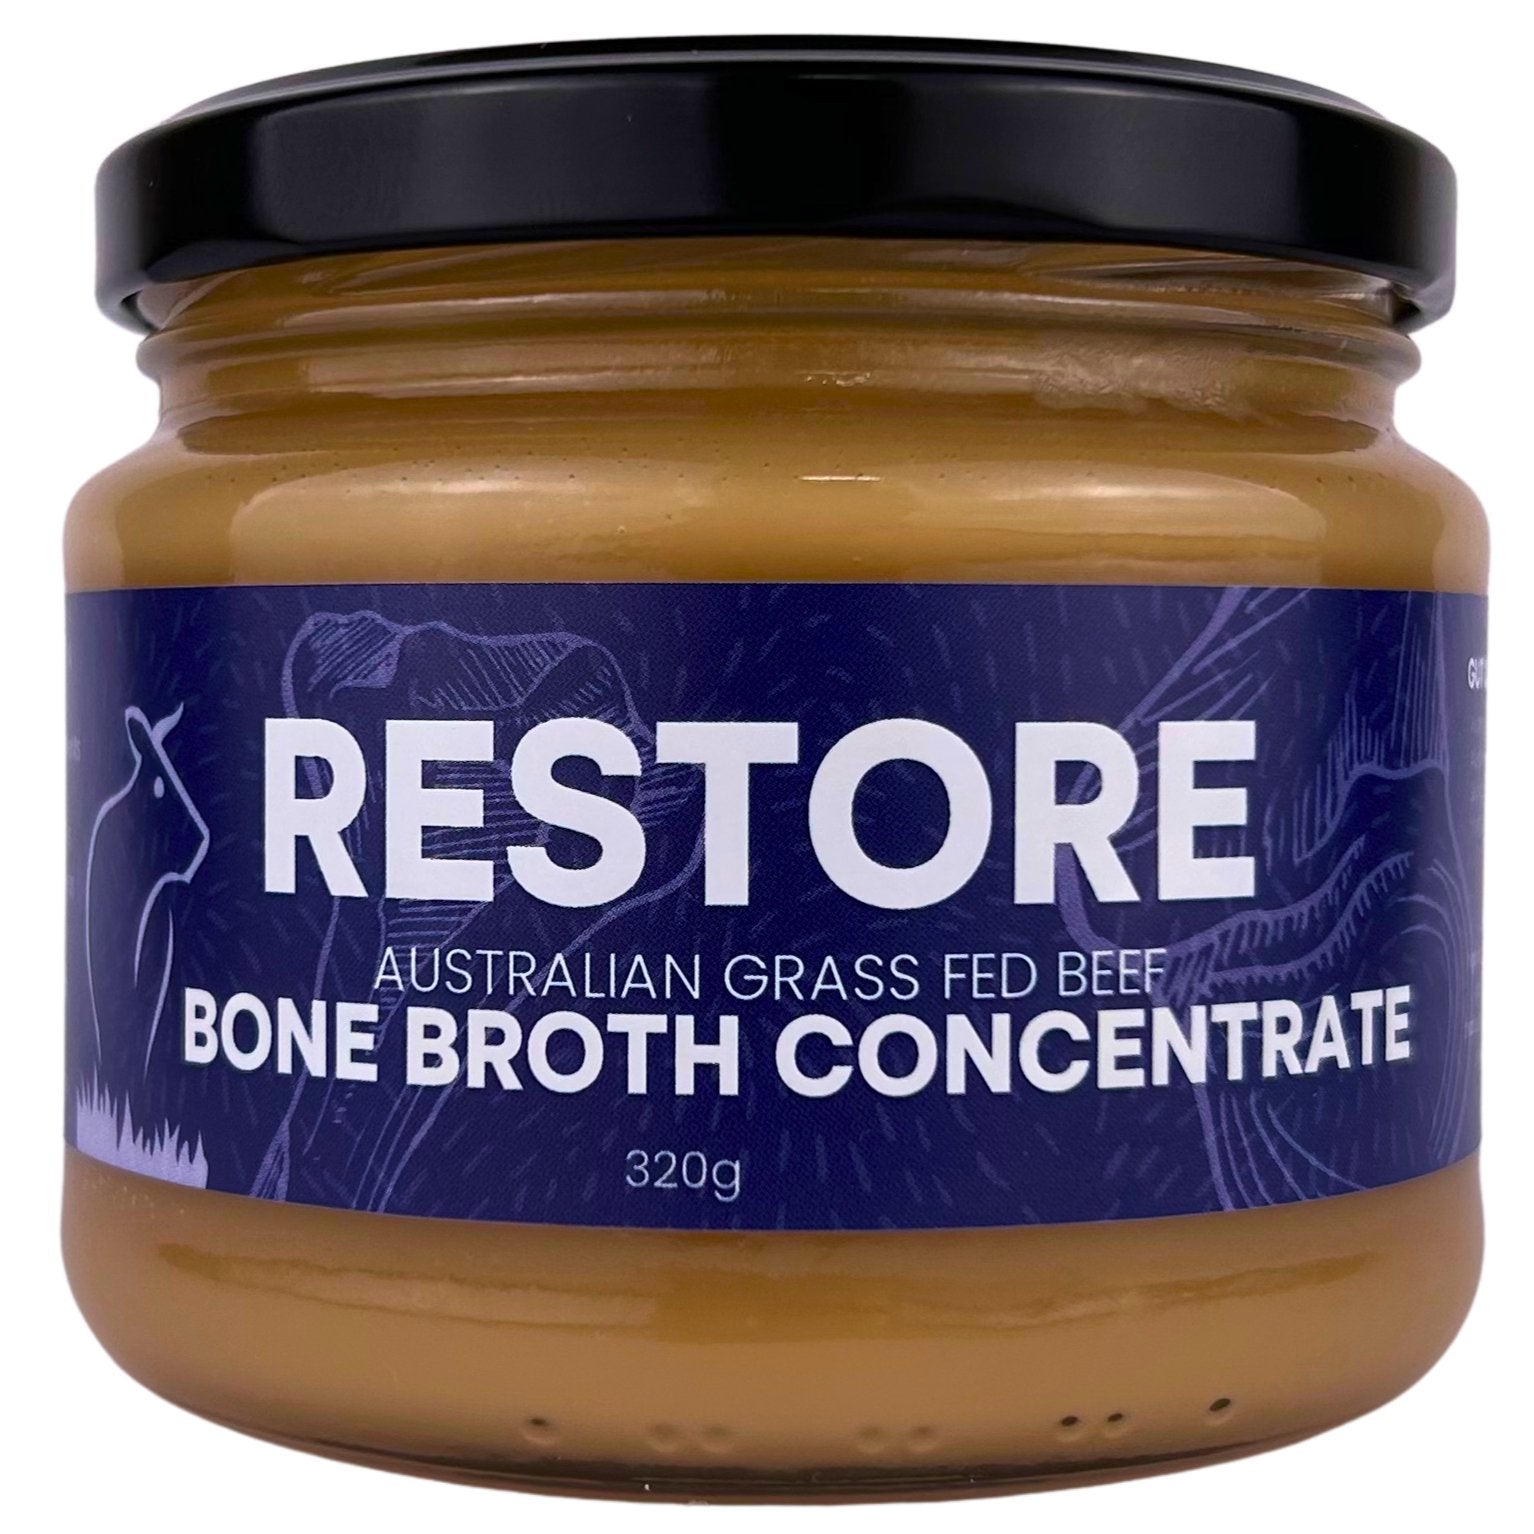 RESTORE - Concentrated Beef Bone Broth.